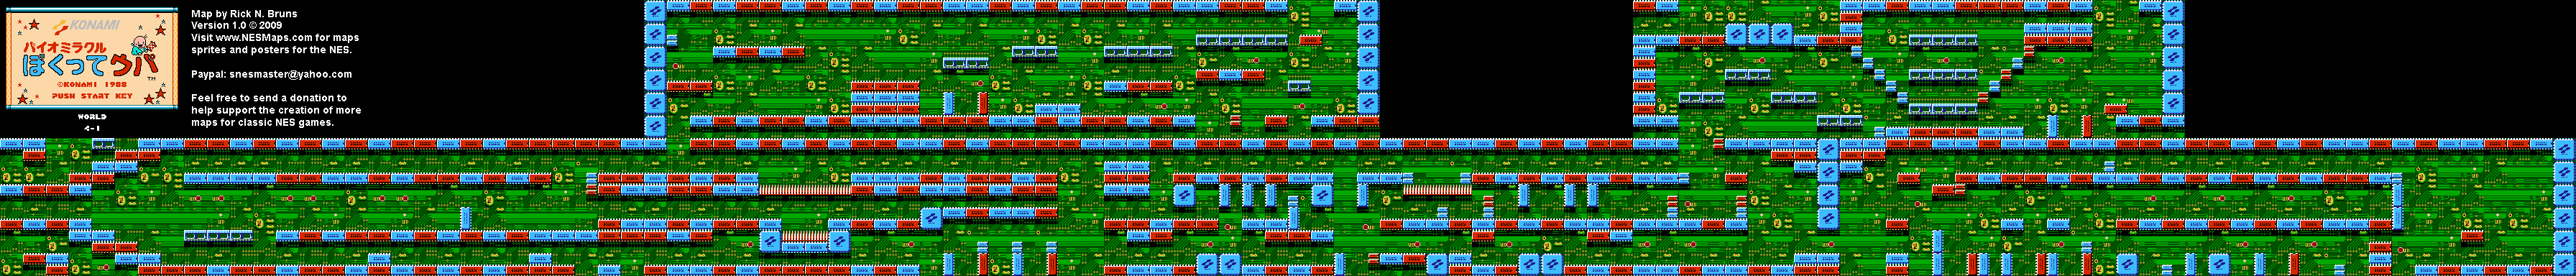 Bio Miracle Bokutte Upa - World 4-1 Nintendo NES Background Only Map